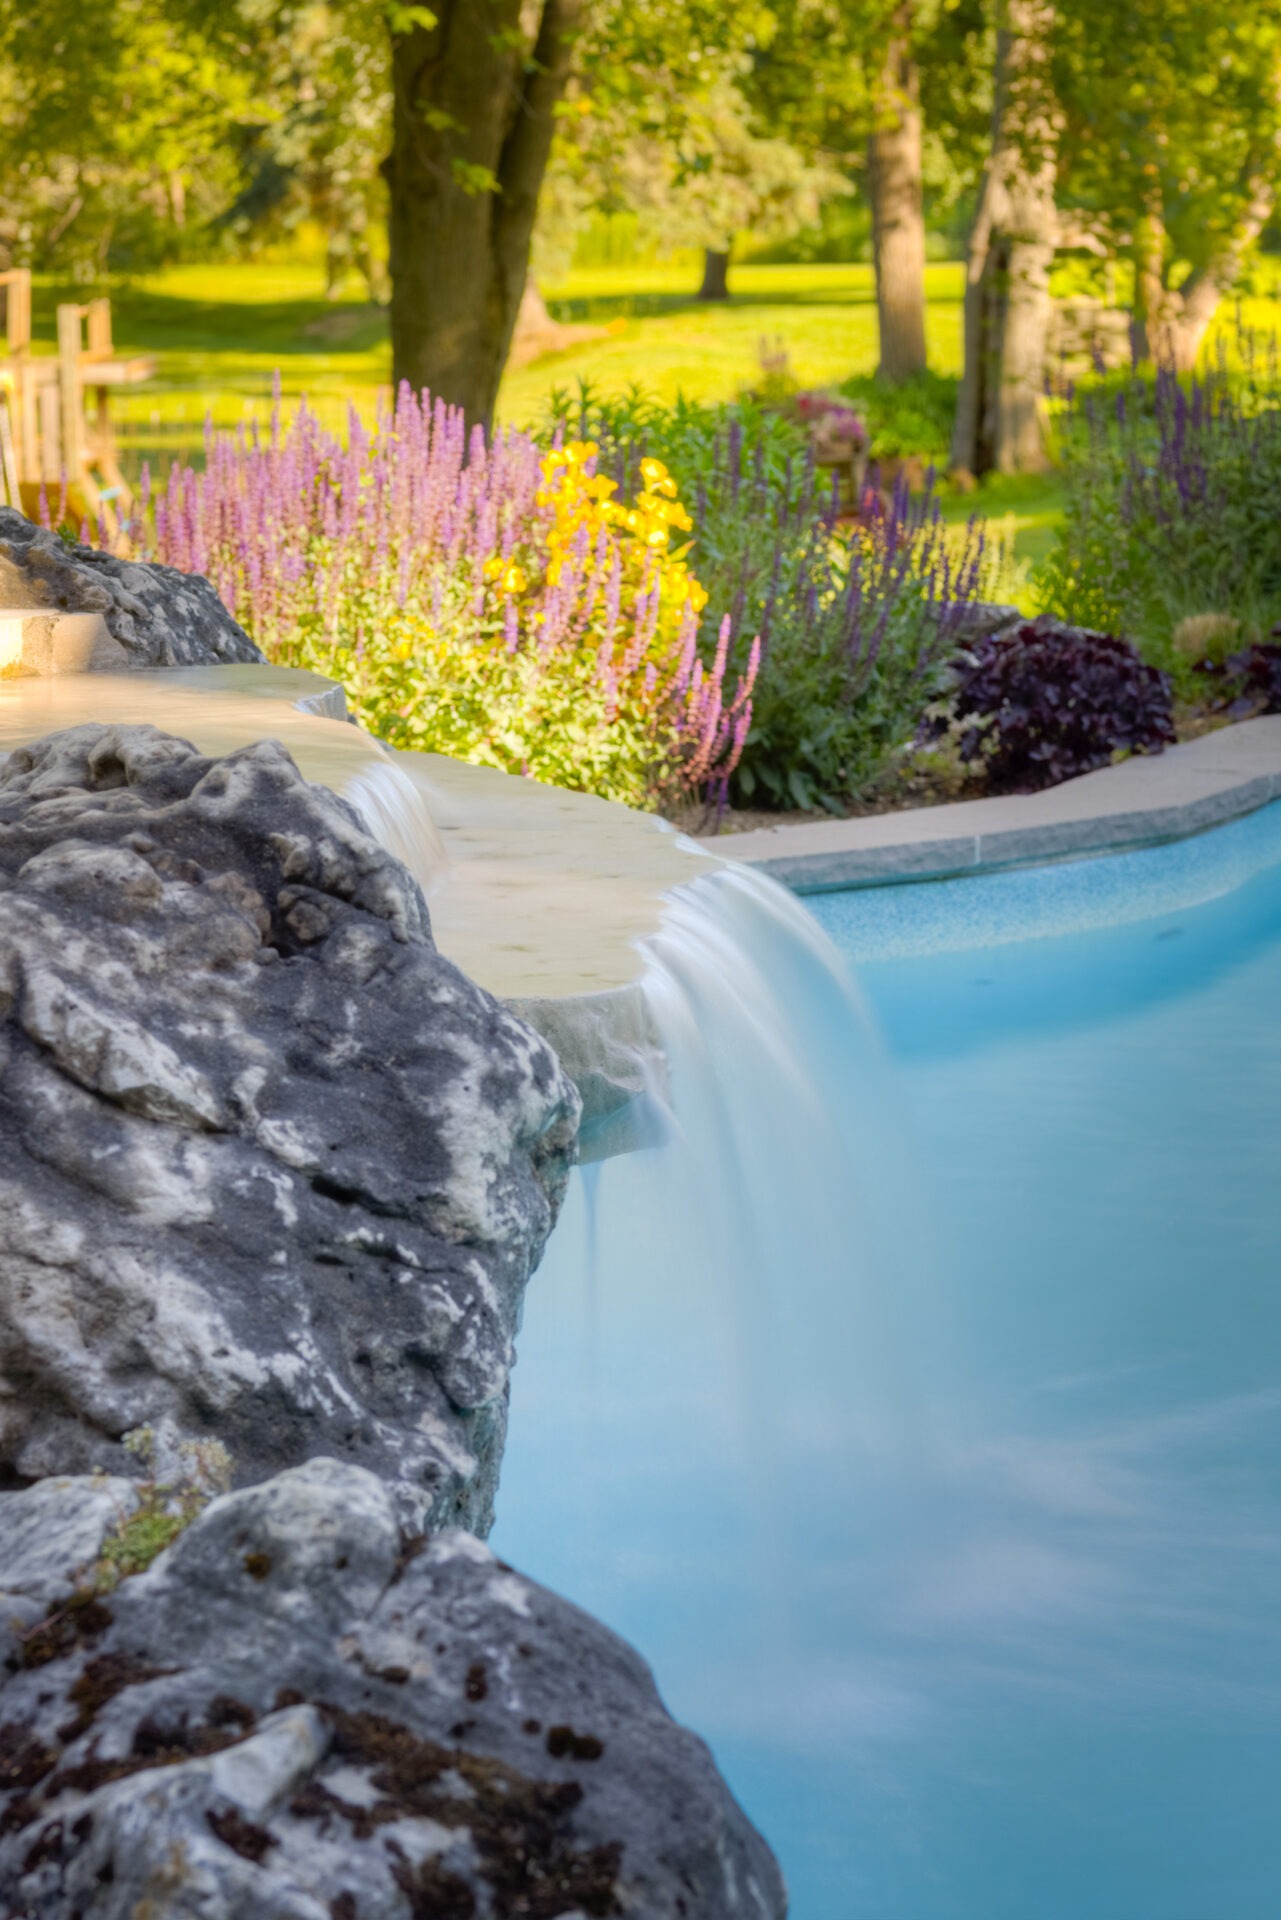 A serene artificial waterfall with clear blue water cascading over textured rocks, surrounded by lush colorful garden beds and green trees in the background.